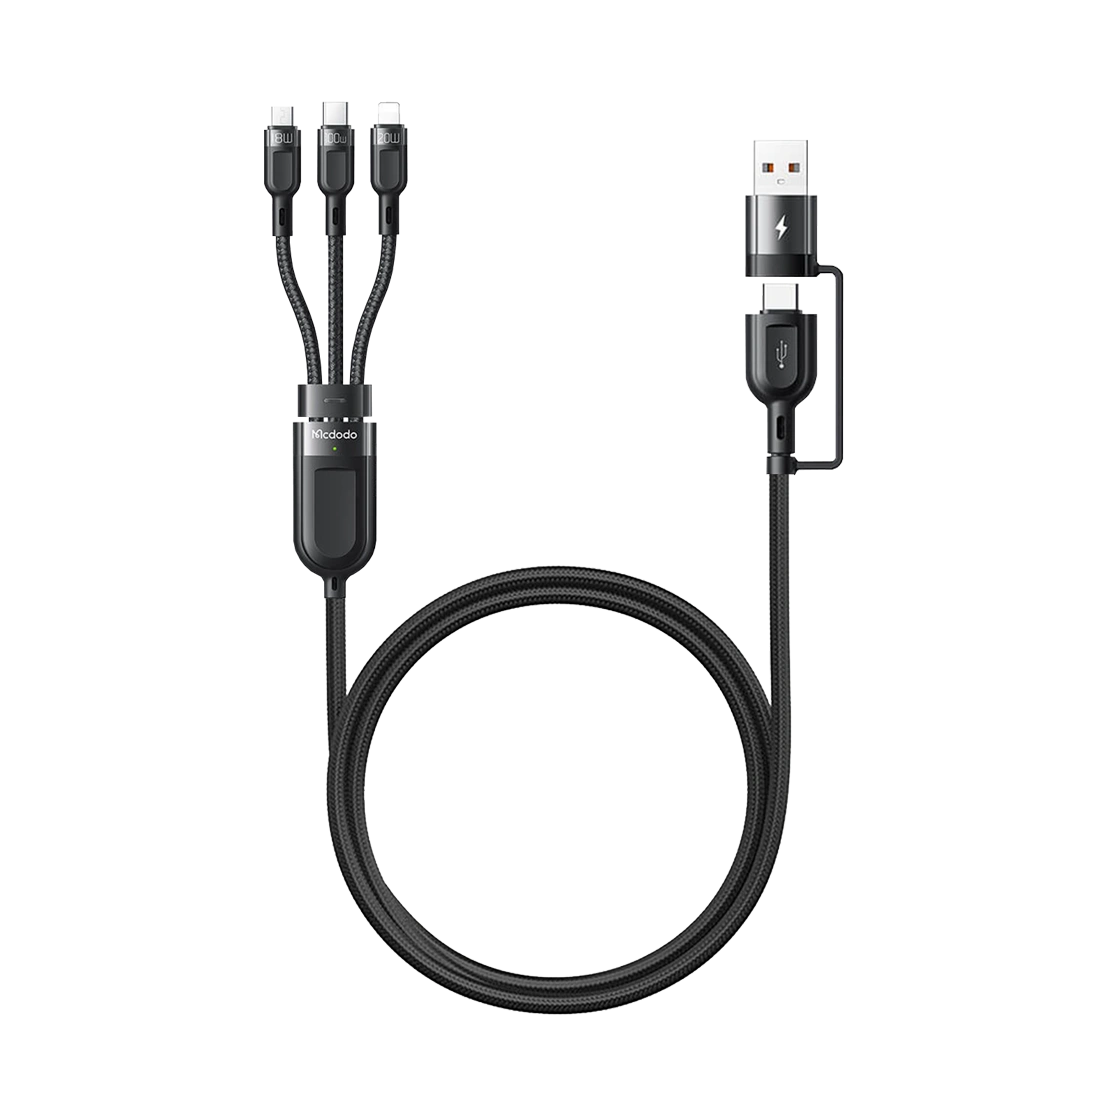 mcdodo-fast-charger-cable-3-in-1-120cm-ca-8800